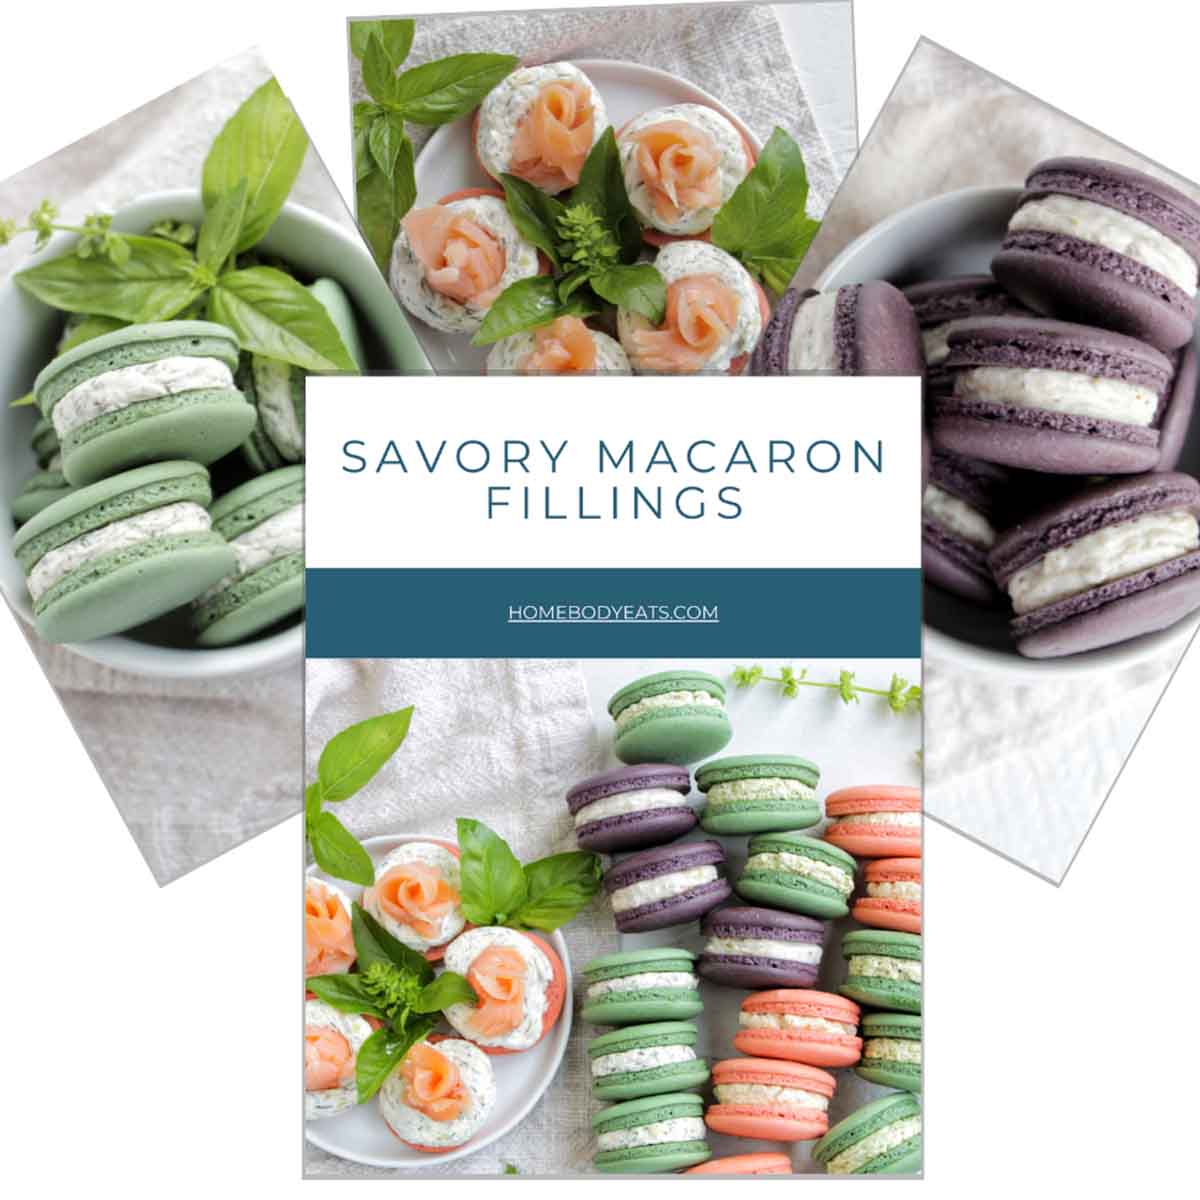 The Savory Macaron ebook cover with various types macarons.